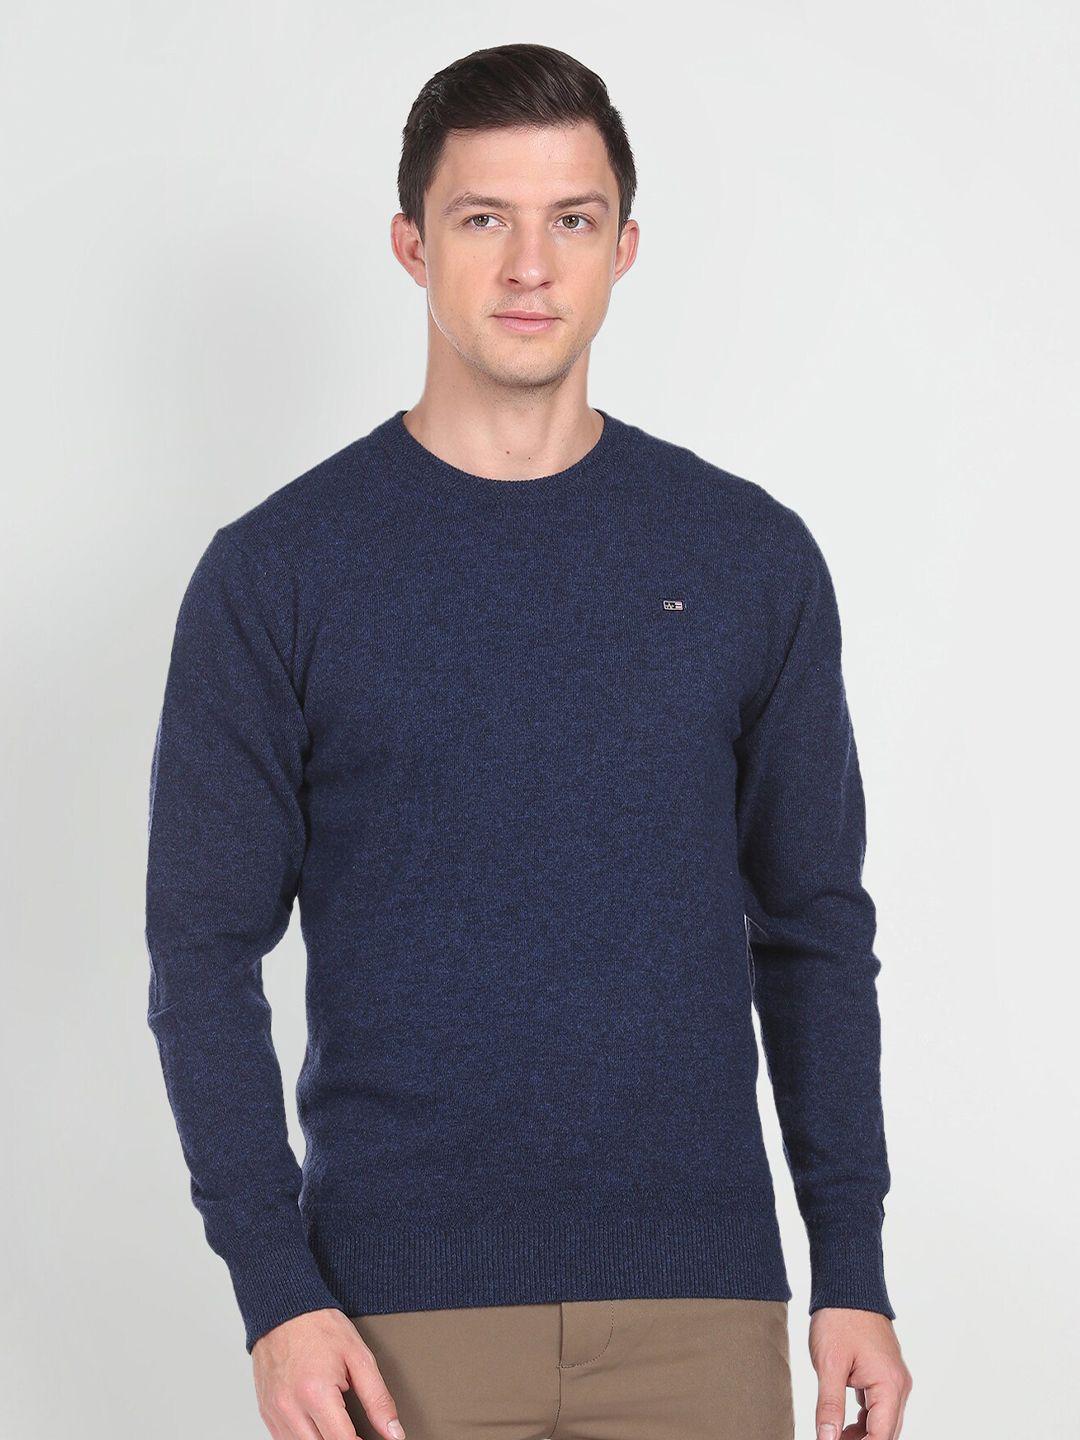 arrow-sport-round-neck-long-sleeves-pullover-sweater